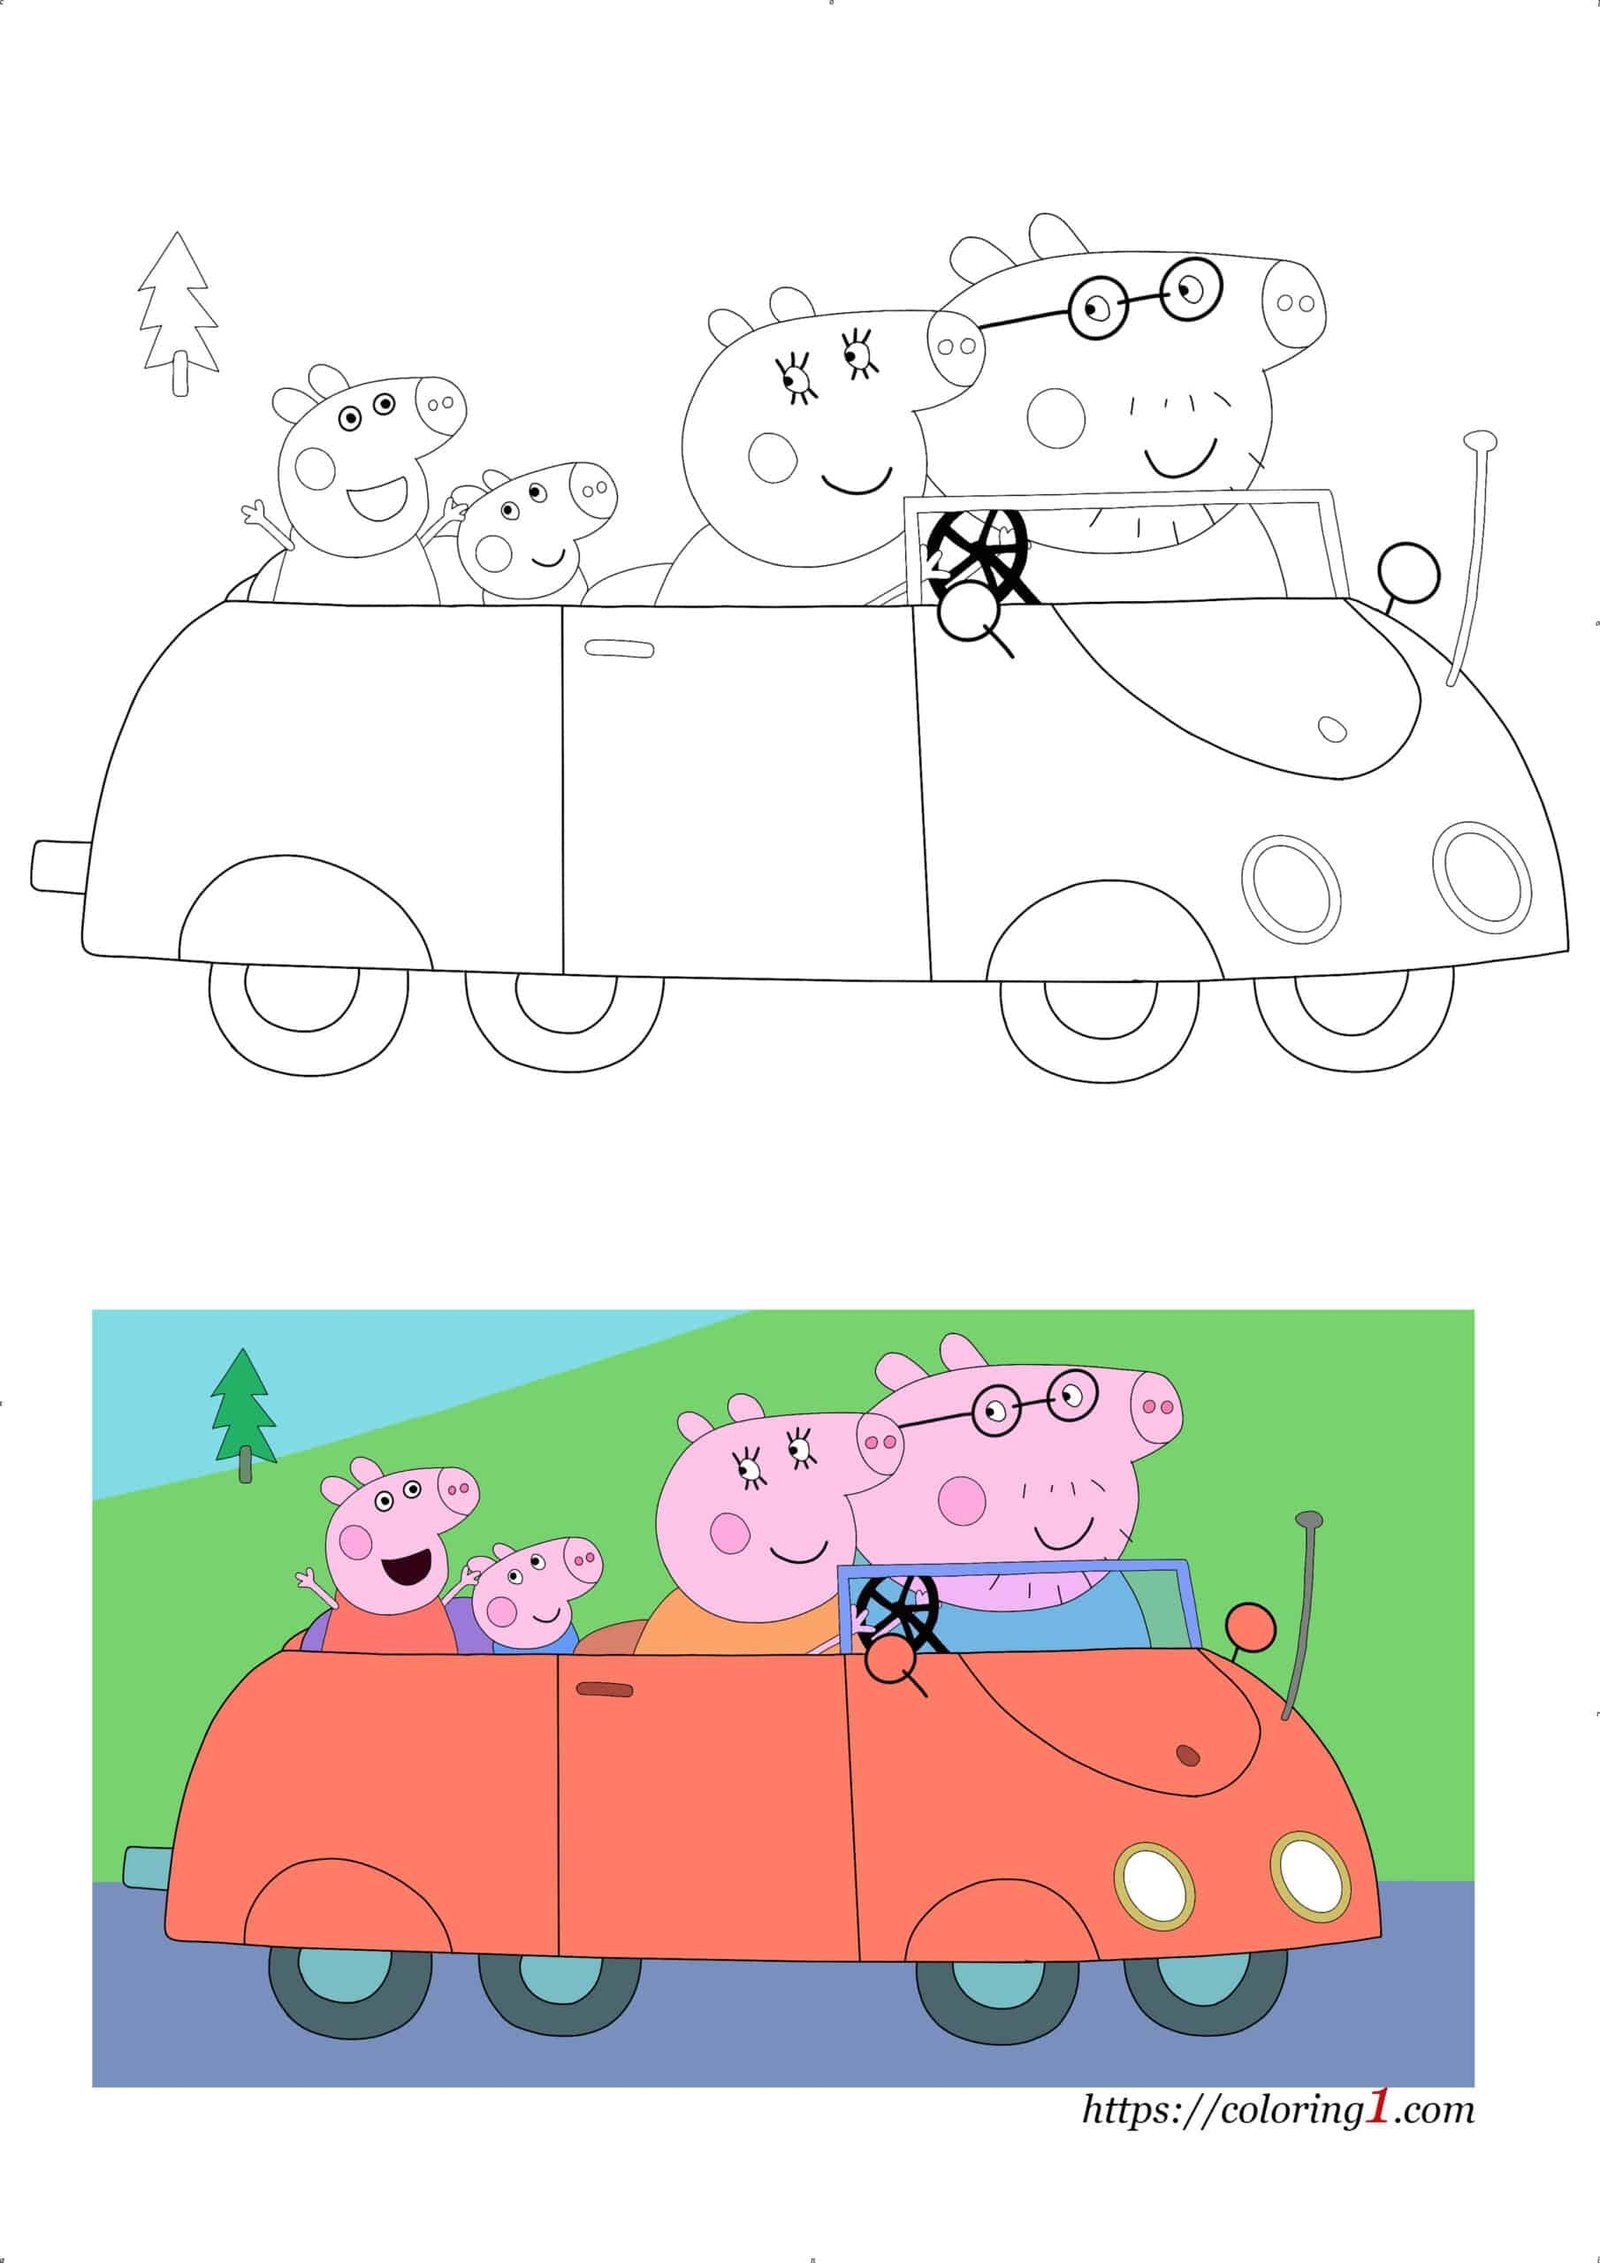 Peppa pig car coloring pages